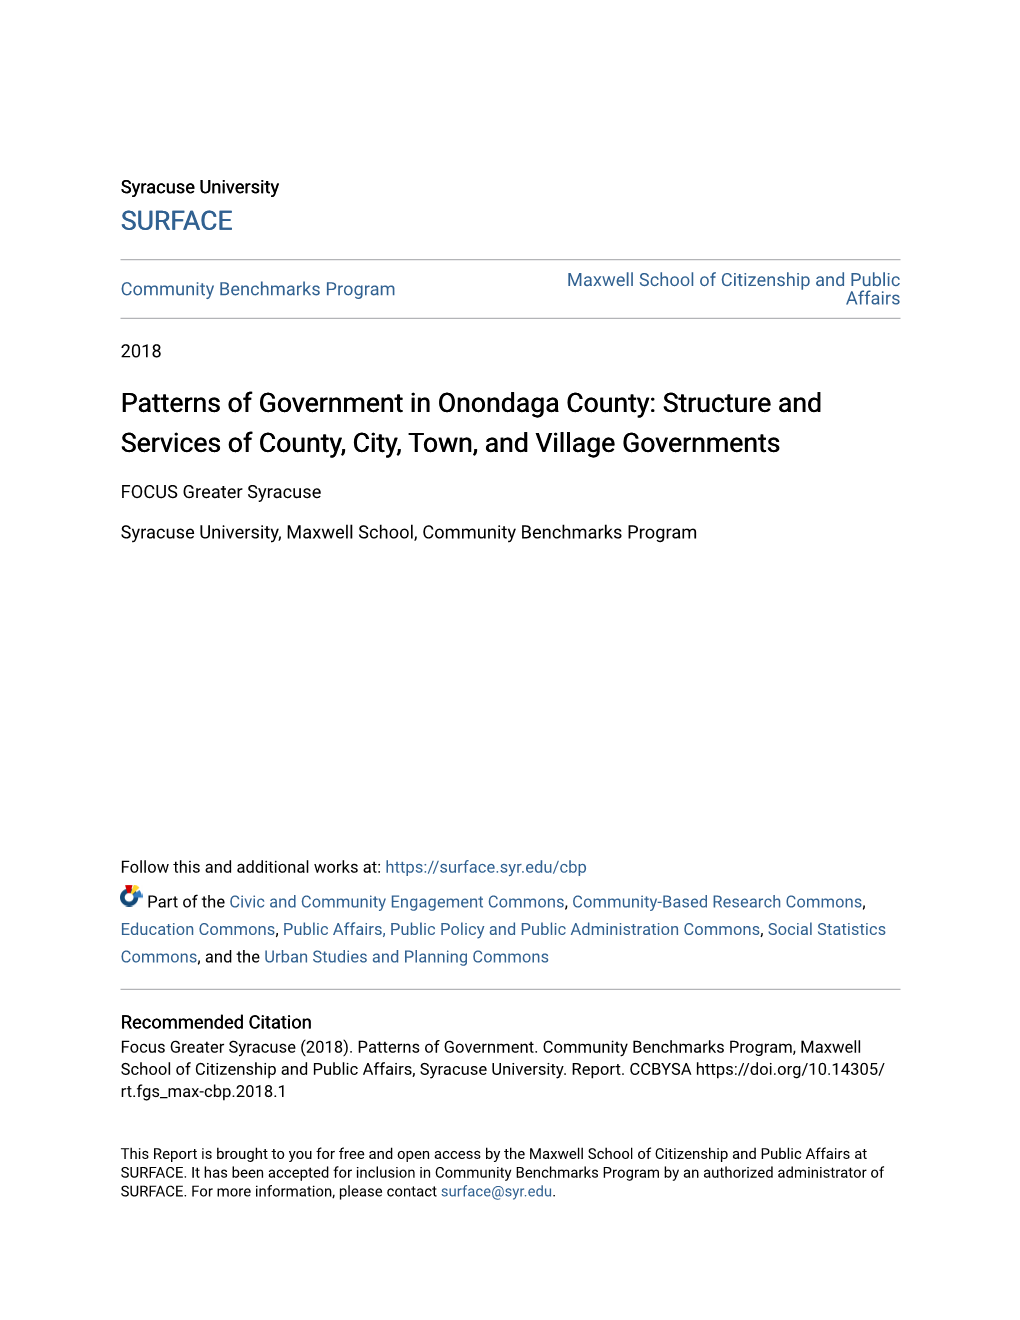 Patterns of Government in Onondaga County: Structure and Services of County, City, Town, and Village Governments